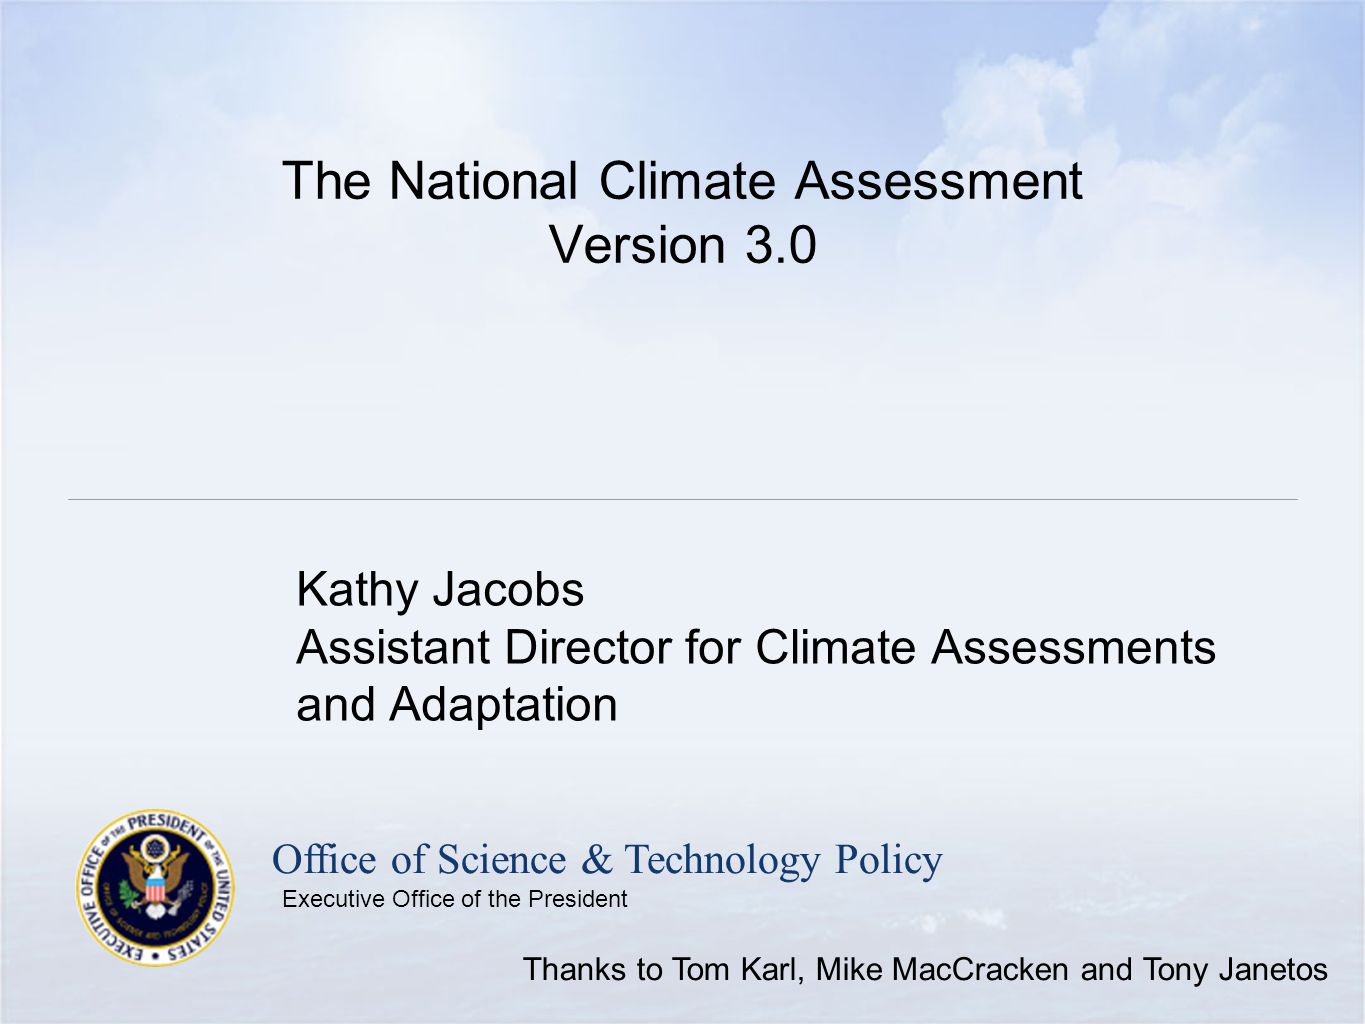 Office of Science & Technology Policy Executive Office of the President The National Climate Assessment Version 3.0 Kathy Jacobs Assistant Director for Climate Assessments and Adaptation Thanks to Tom Karl, Mike MacCracken and Tony Janetos